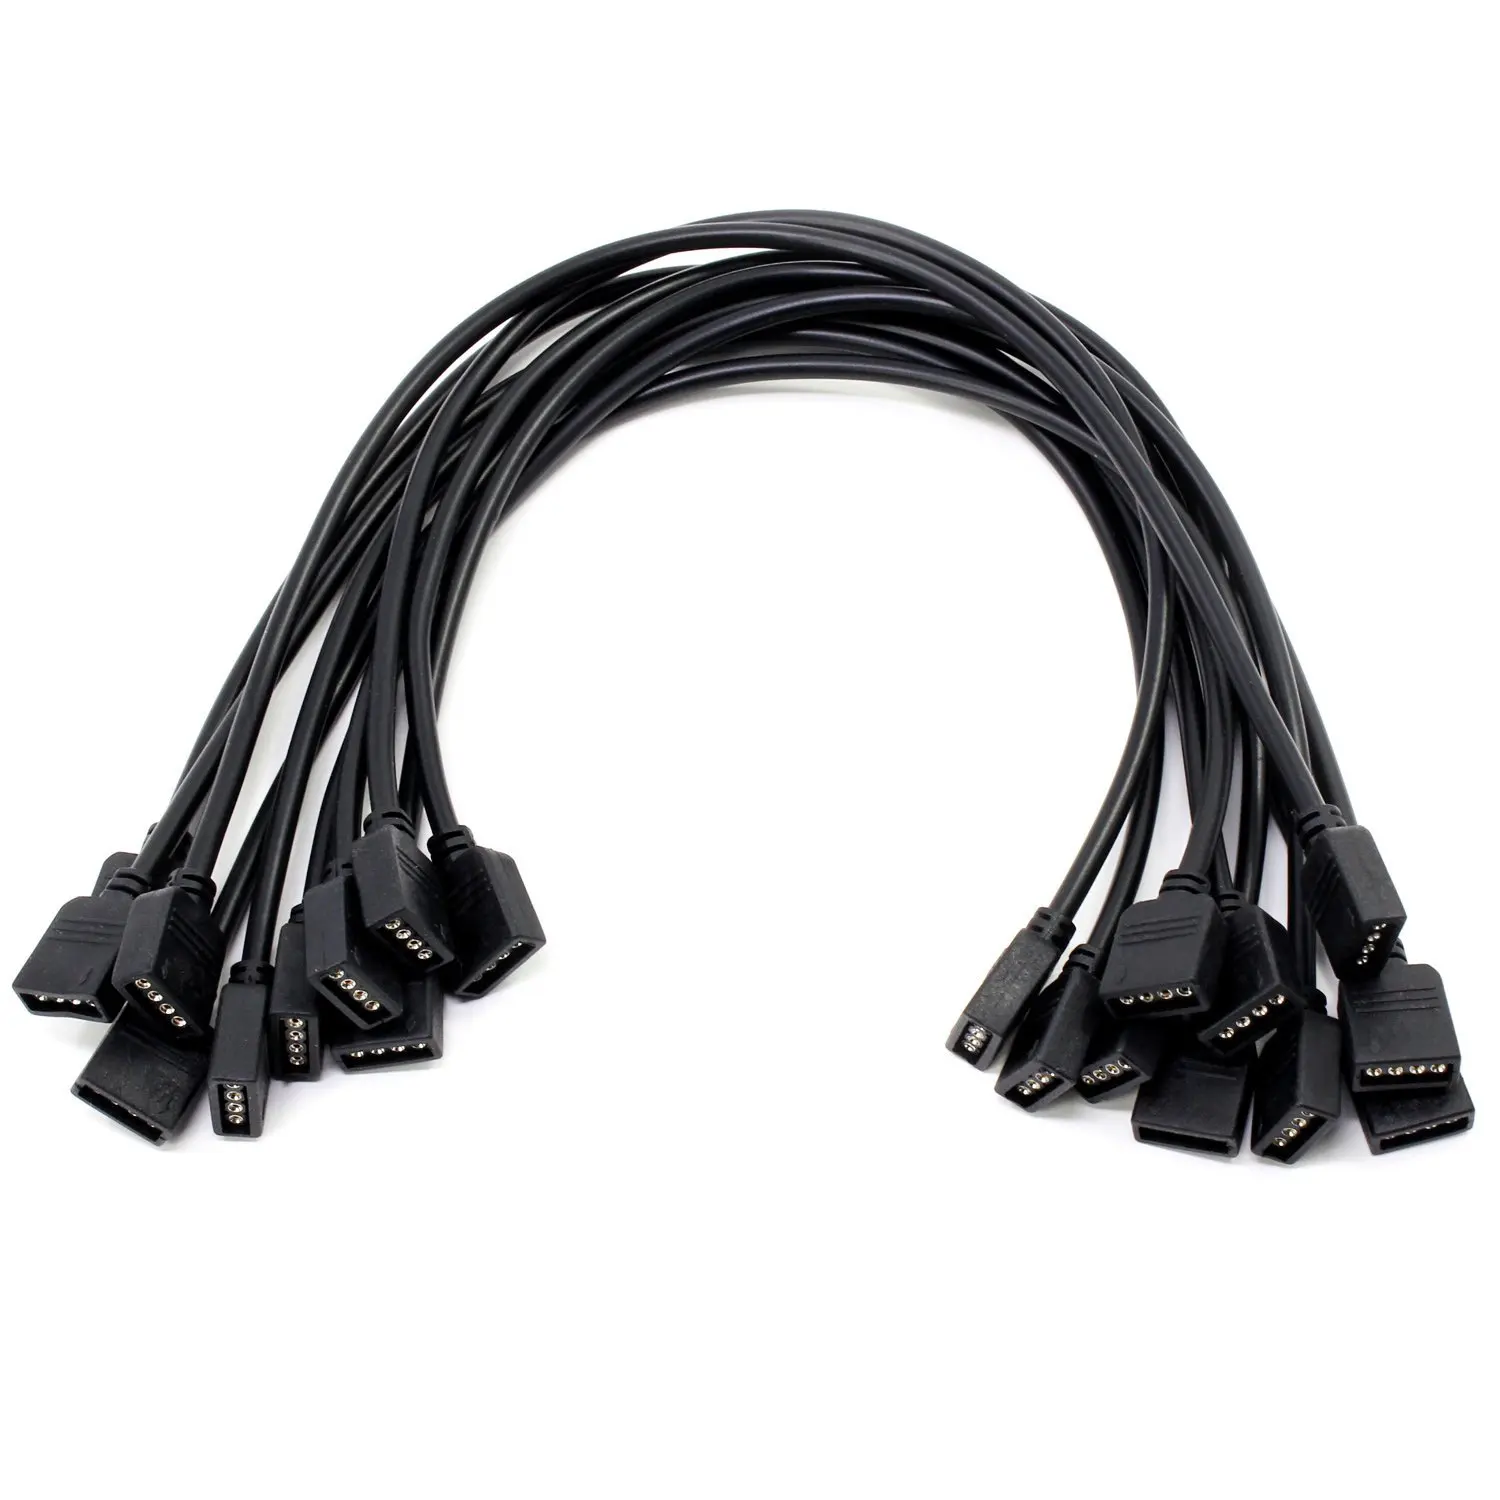 30cm 50cm 100cm 200cm 4Pin Female Extension Cable Cord Connector for RGB 5050 LED Strip